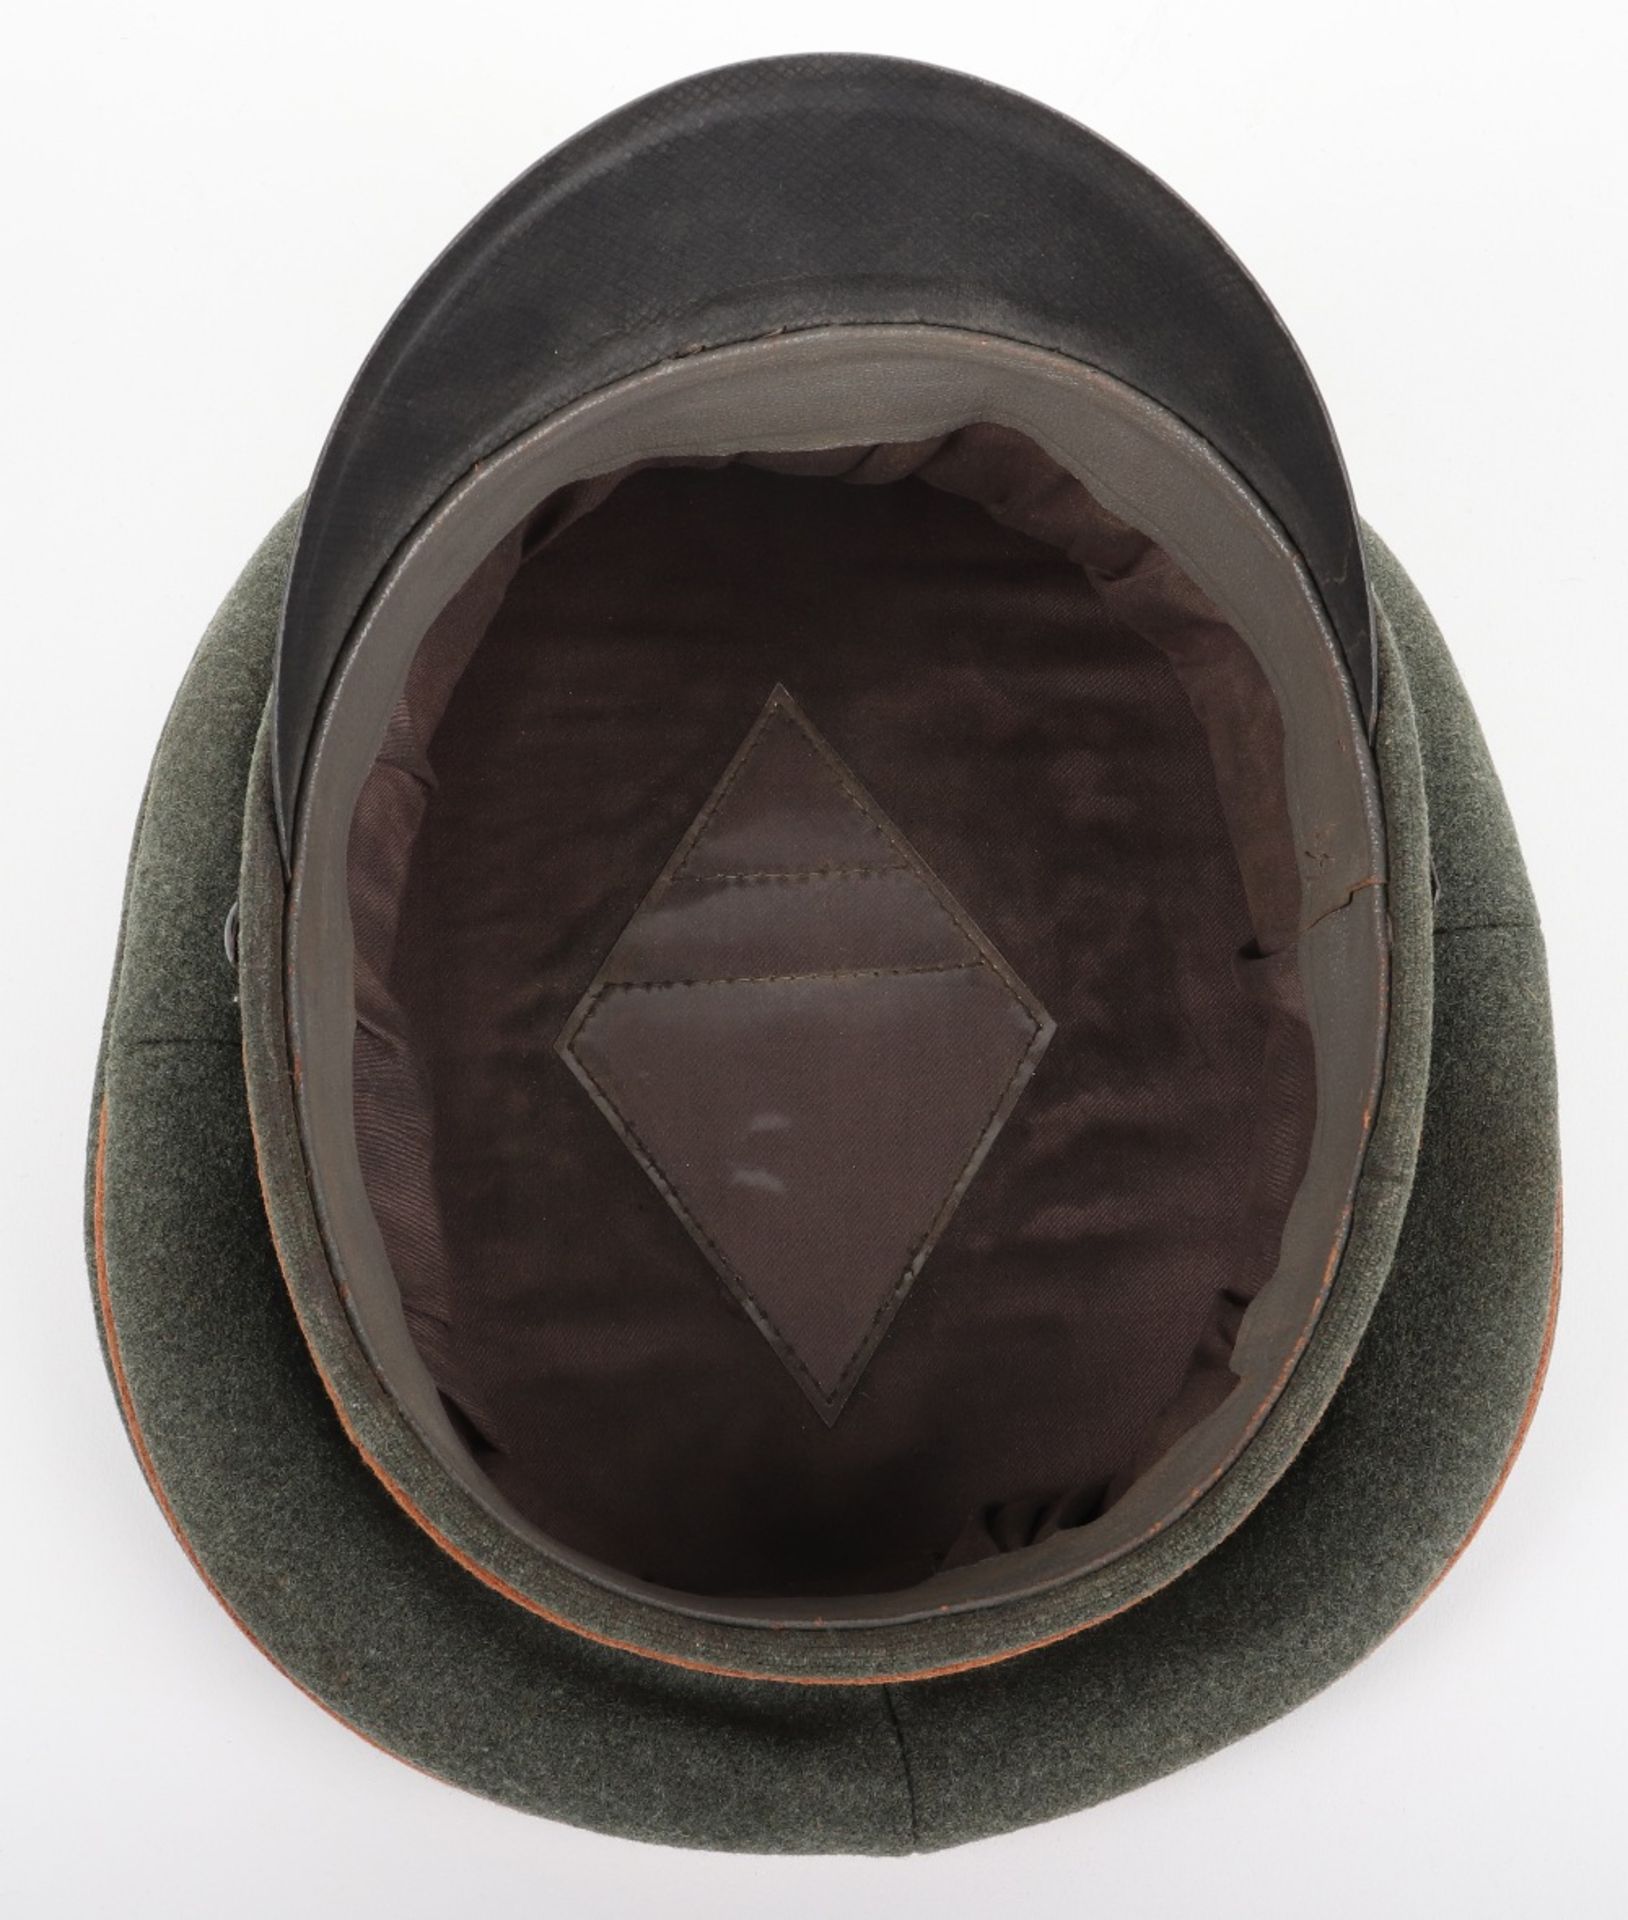 Waffen-SS KZ / Motor Reconnaissance NCO’s Peaked Cap - Image 6 of 6